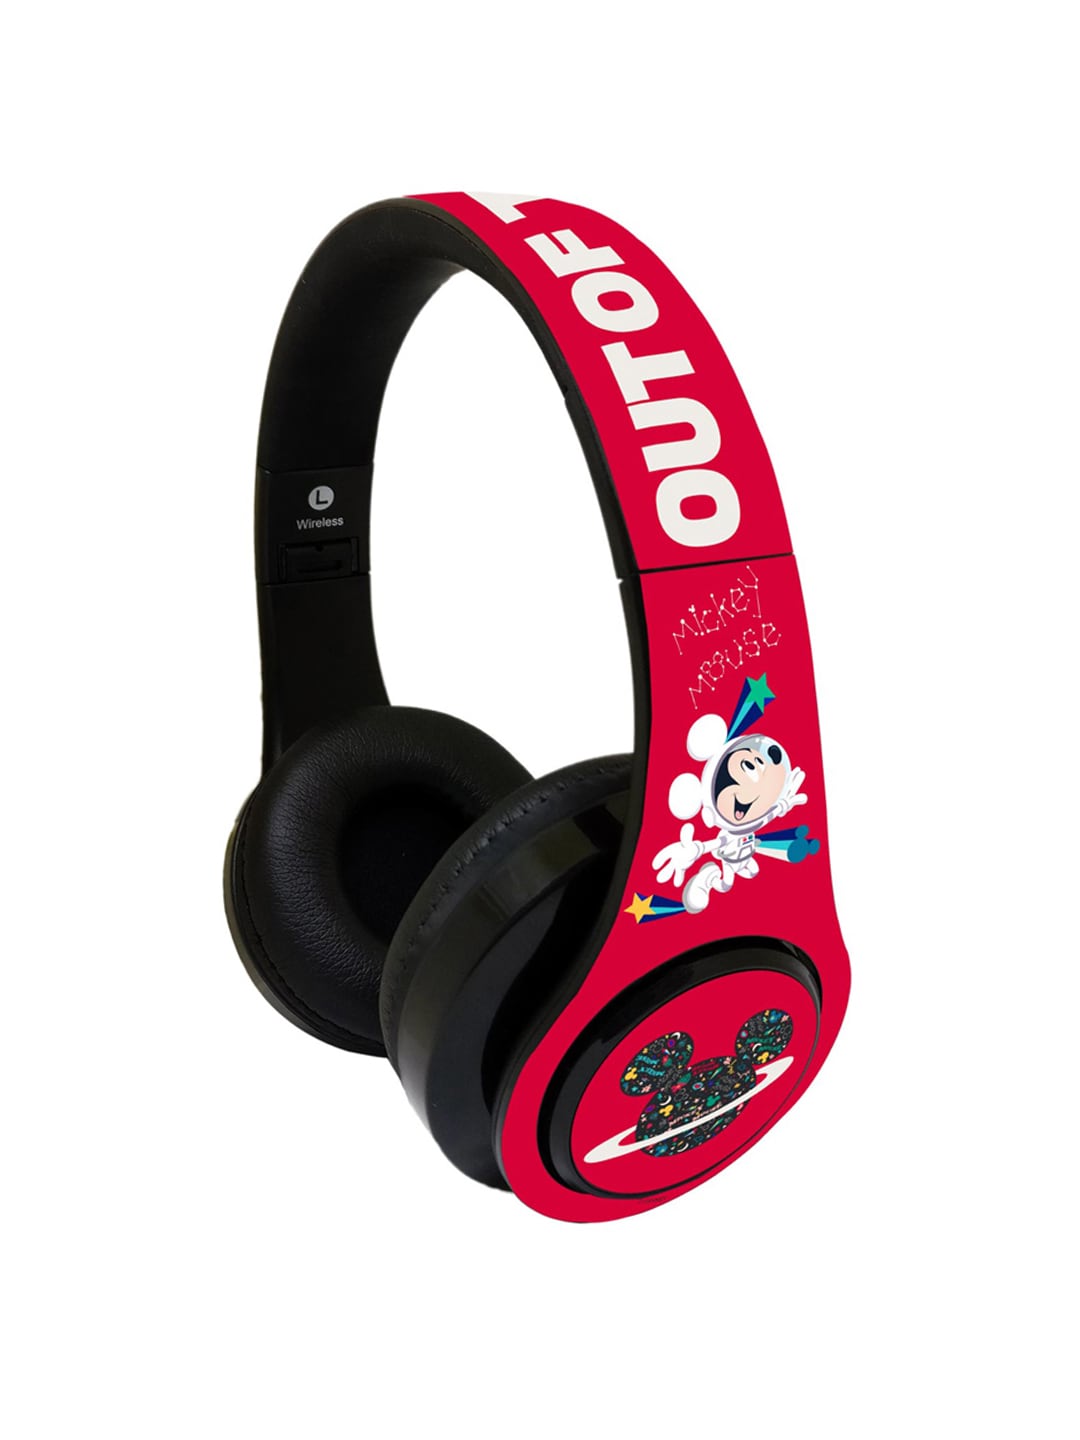 YK Kids Red Mickey Mouse Printed Wireless On Ear Headphone SODCIBLDD5260 Price in India